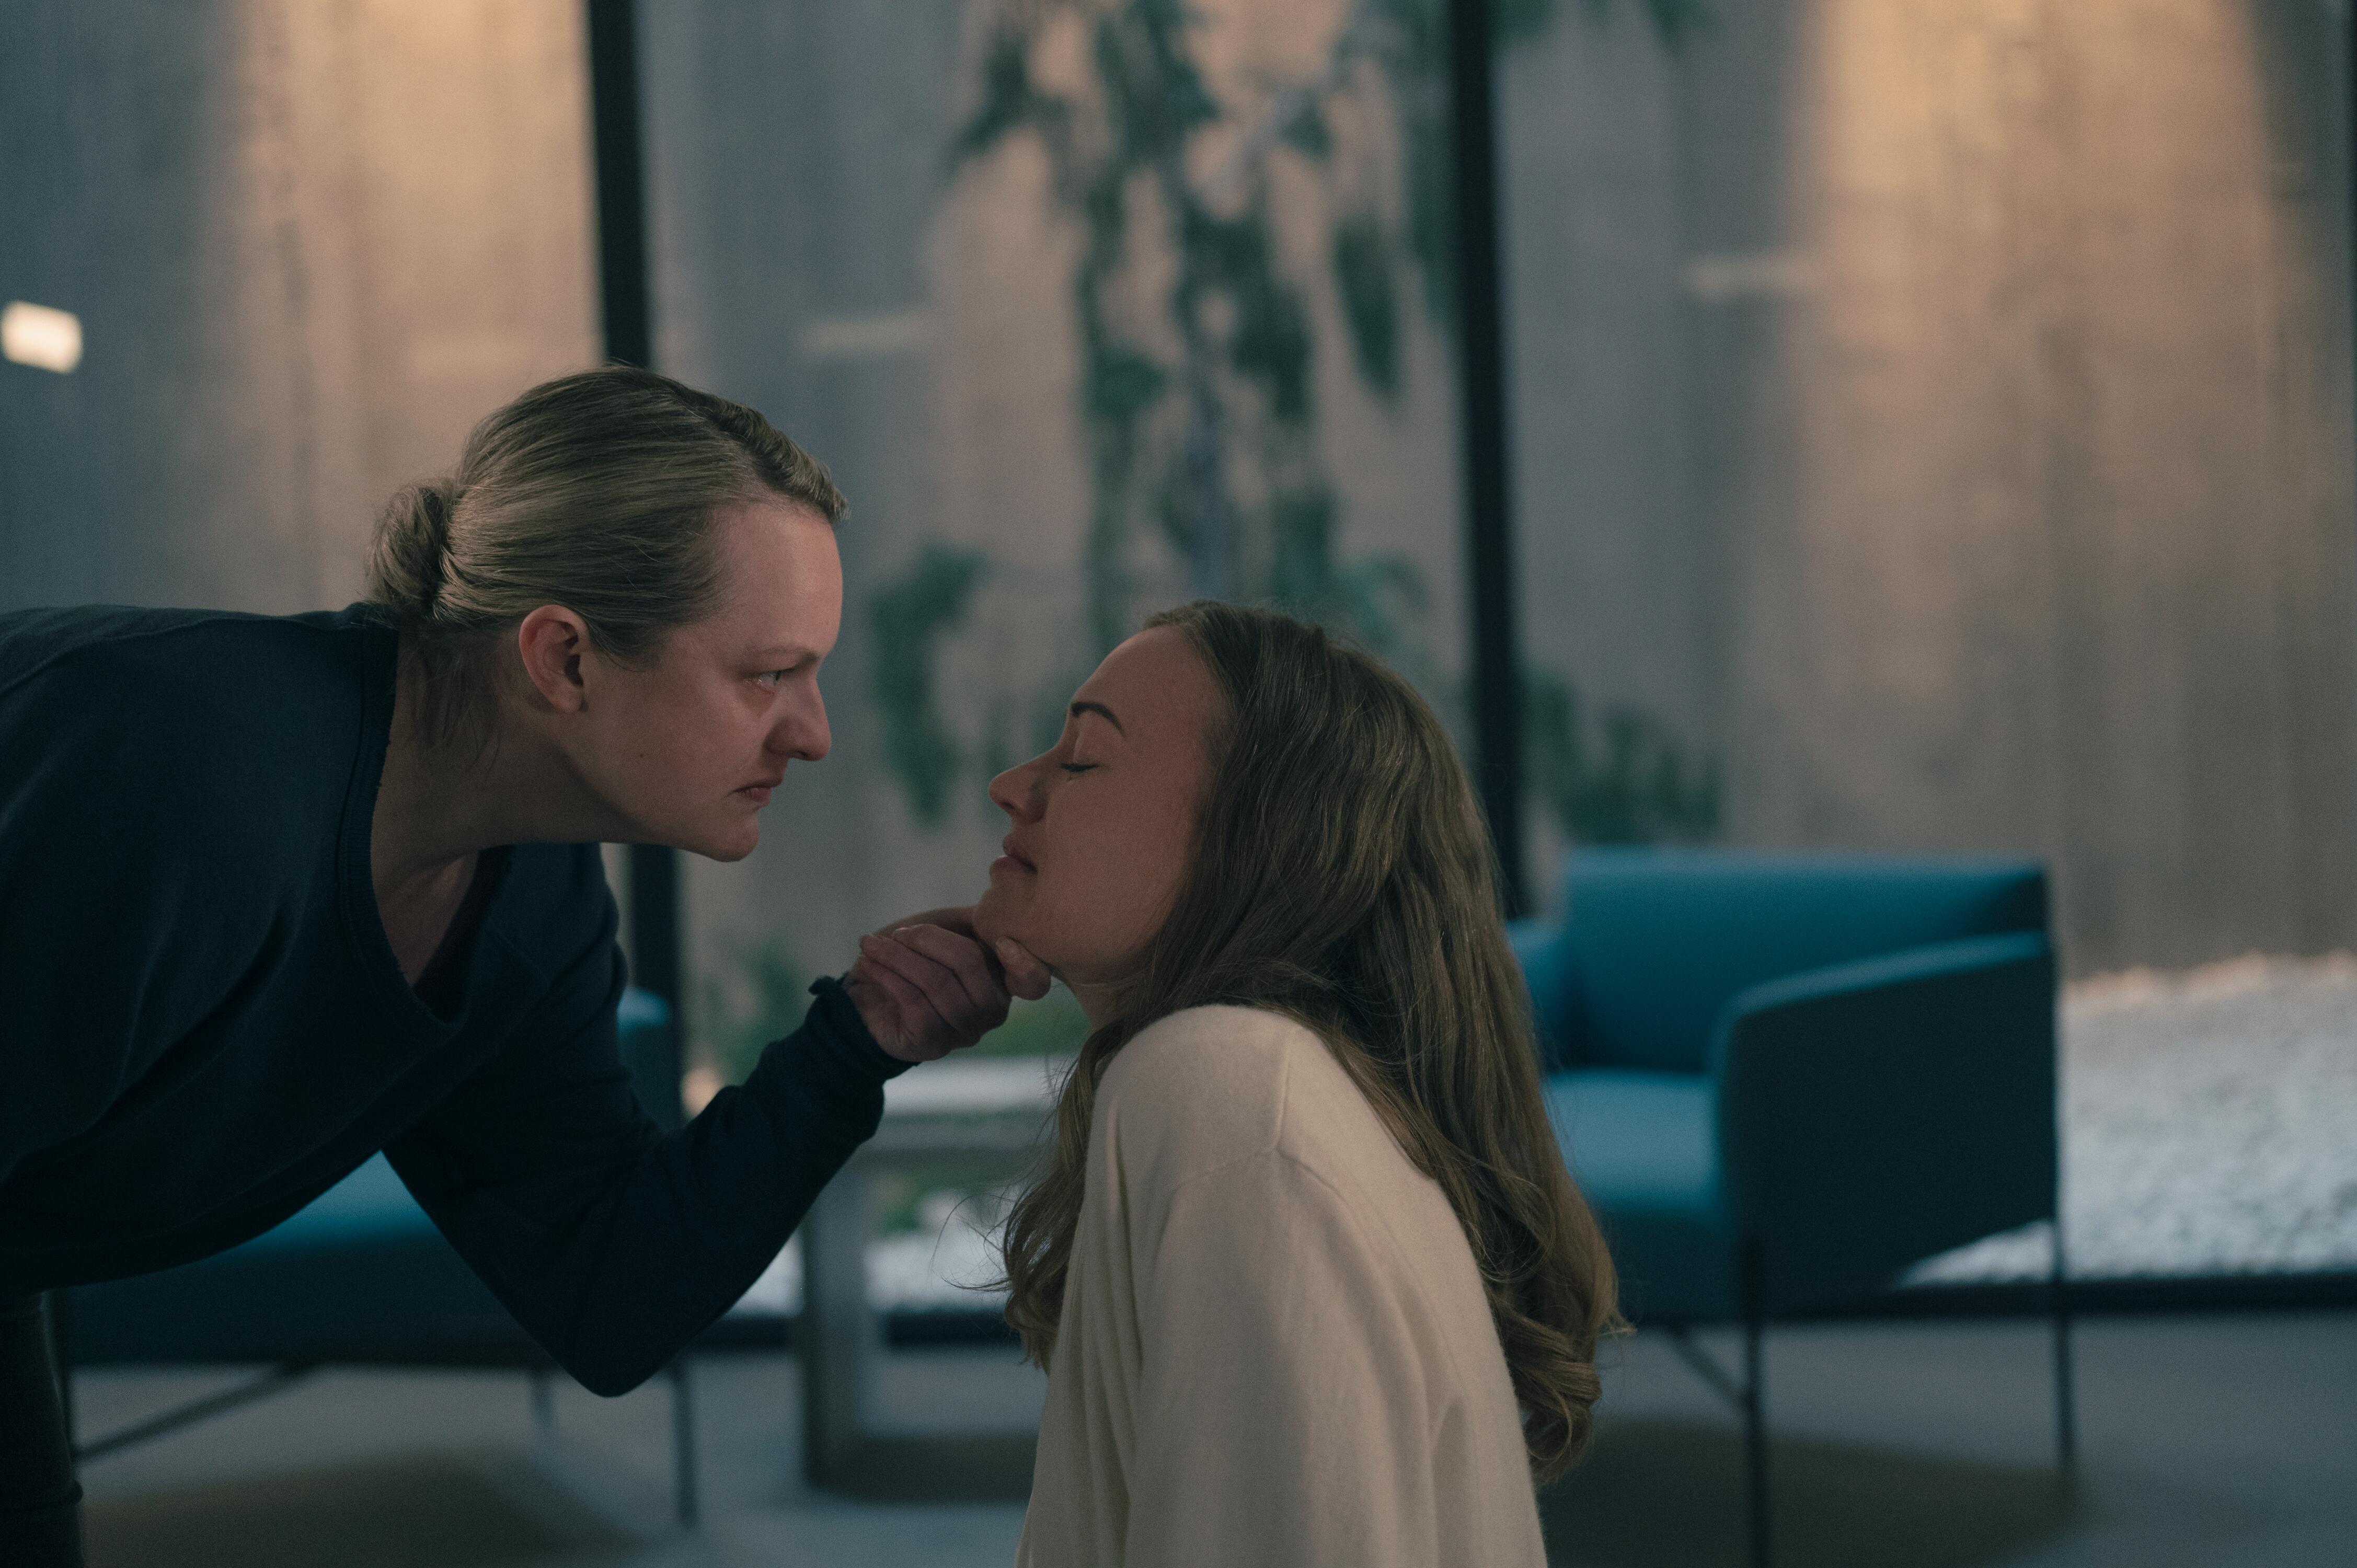 June holds Serena's face in season 4 of 'The Handmaid's Tale'